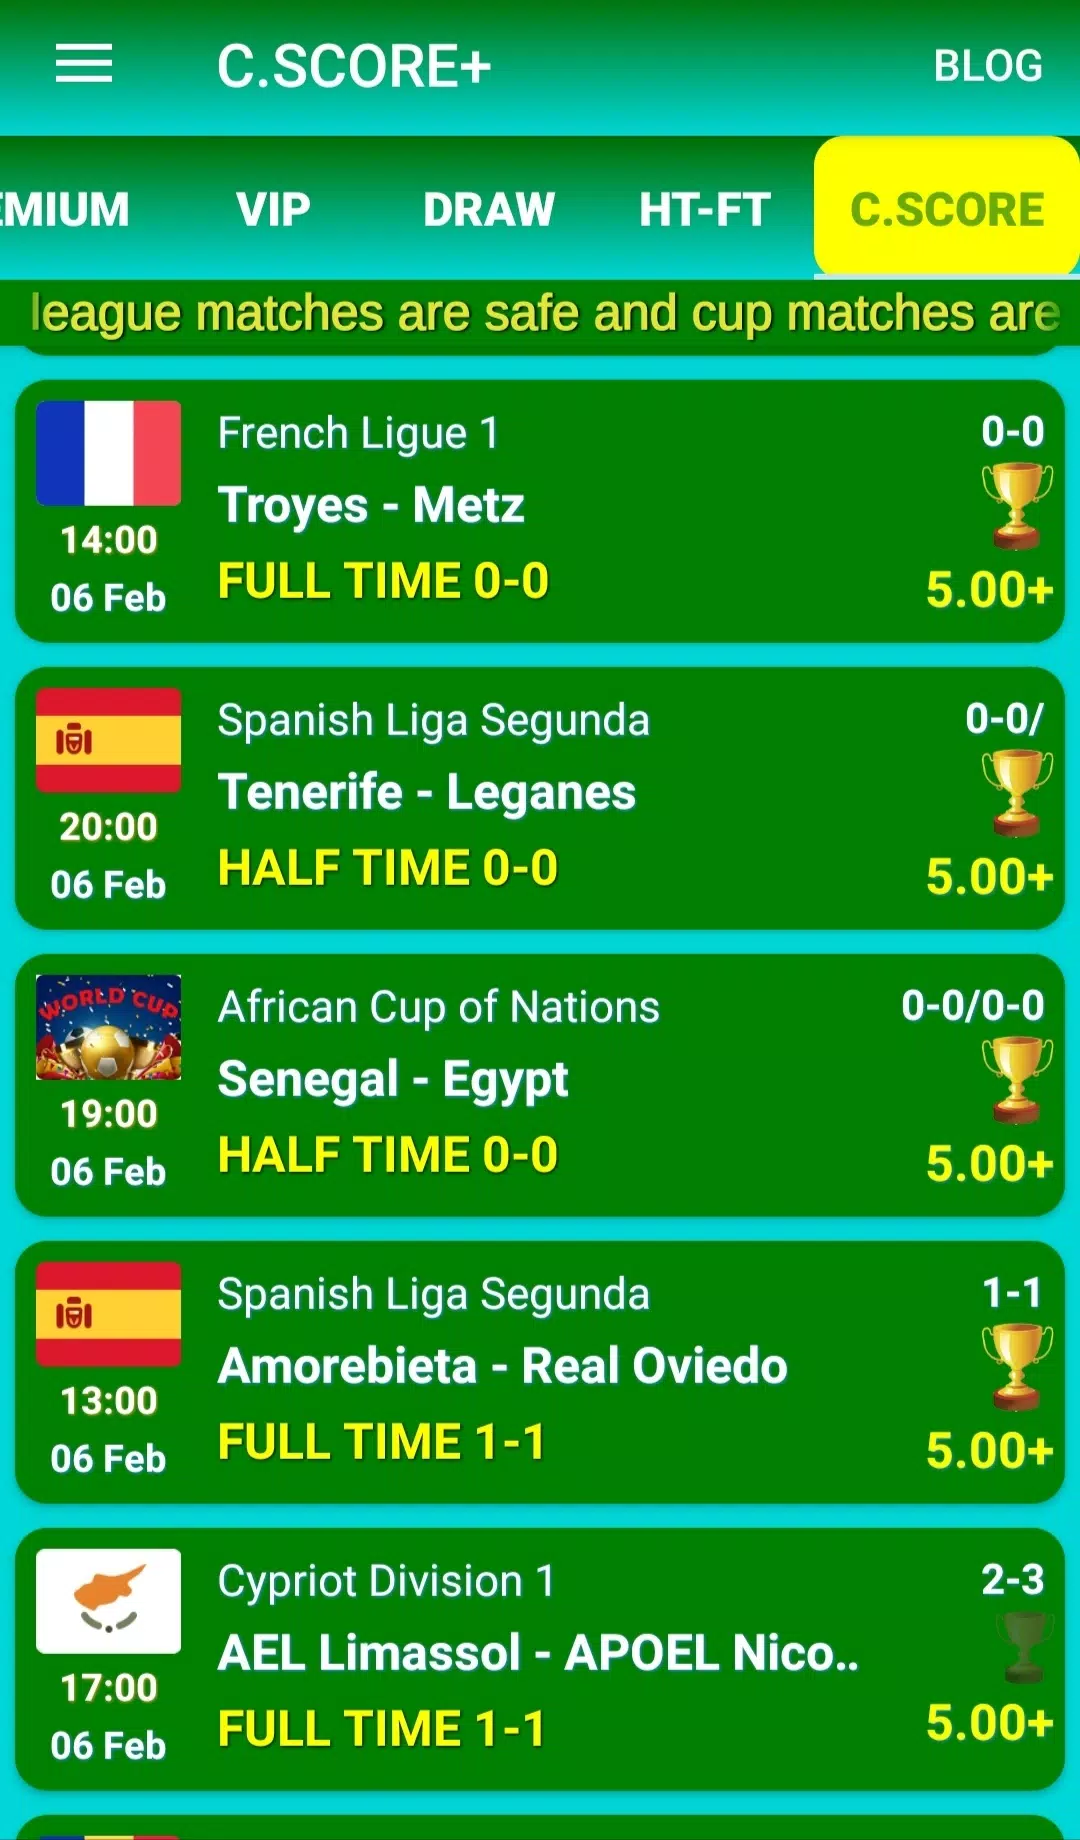 BetsWall Football Betting Tips - Apps on Google Play